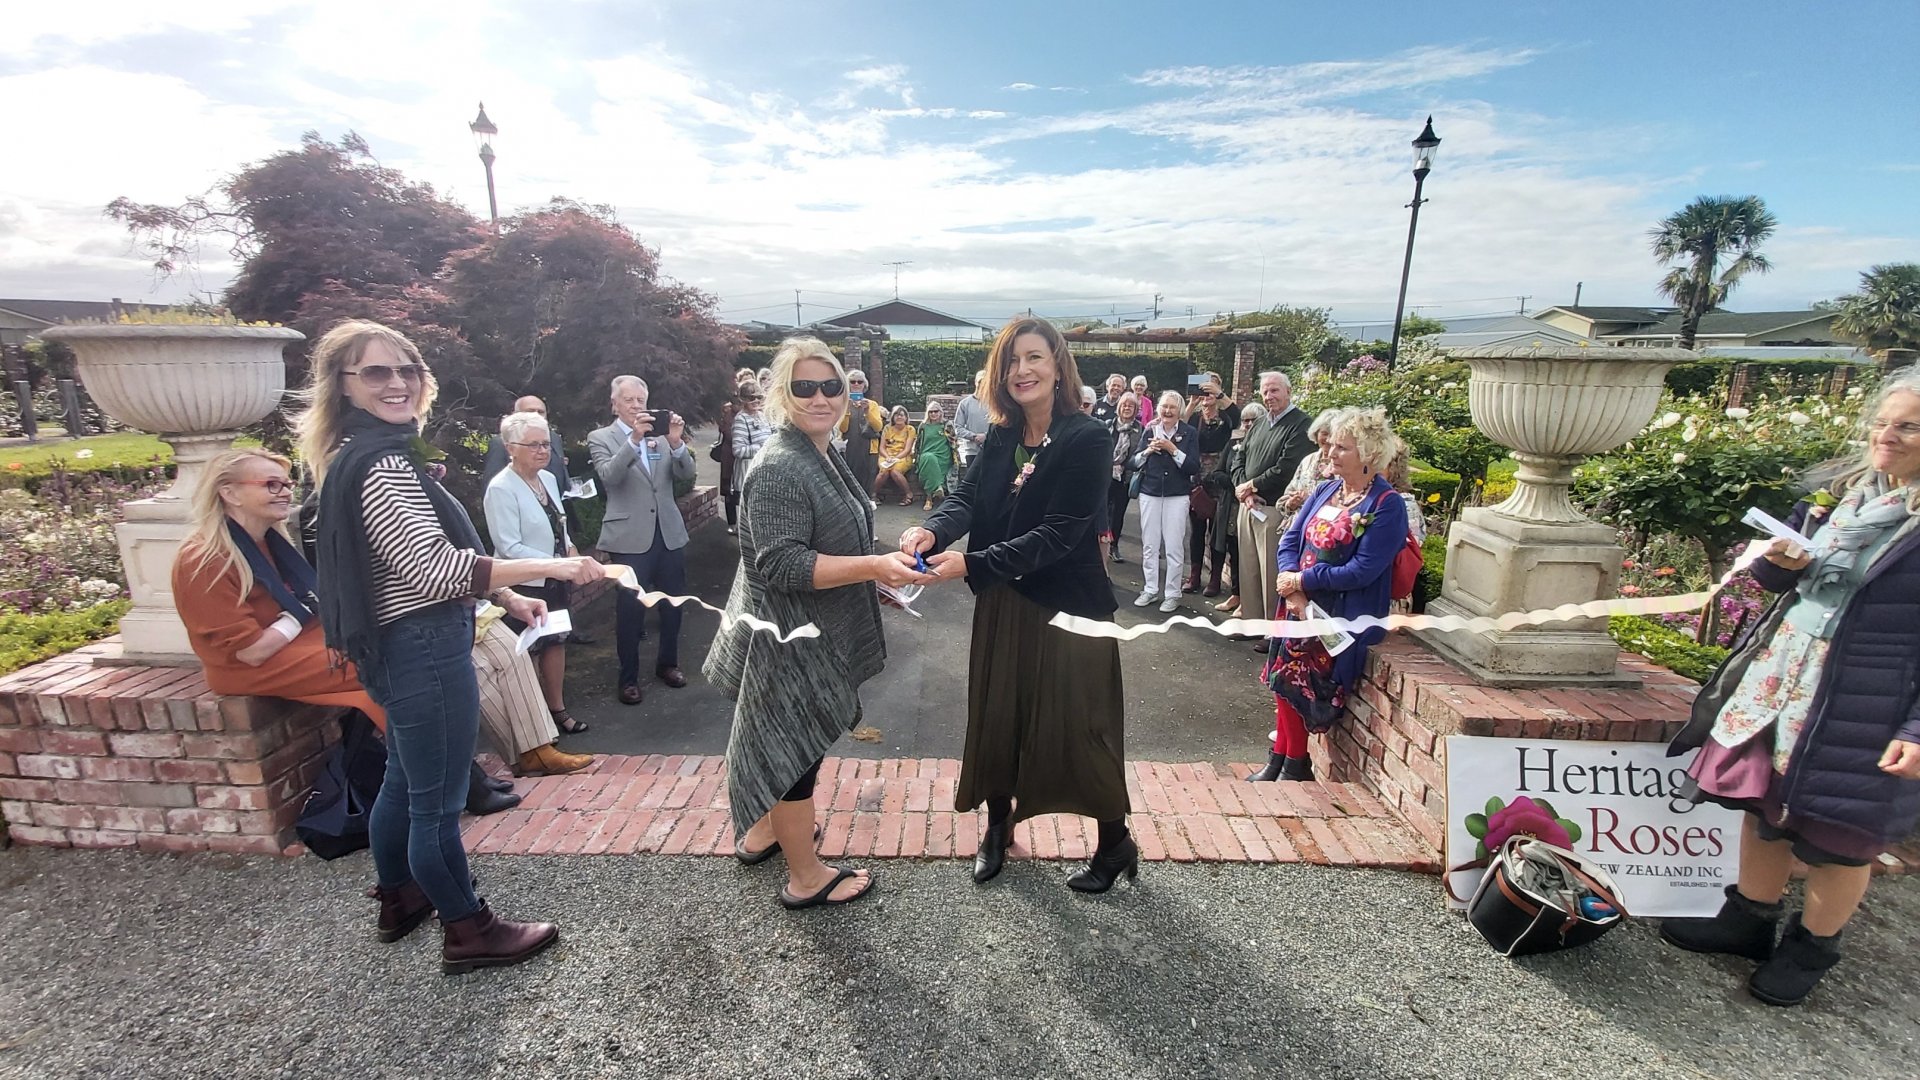 Mayor Rachel Reese and Nelmac’s Horticultural Parks Team Leader Kate Krawczyk cut the ribbon at the opening of the Broadgreen Heritage Rose Walk.